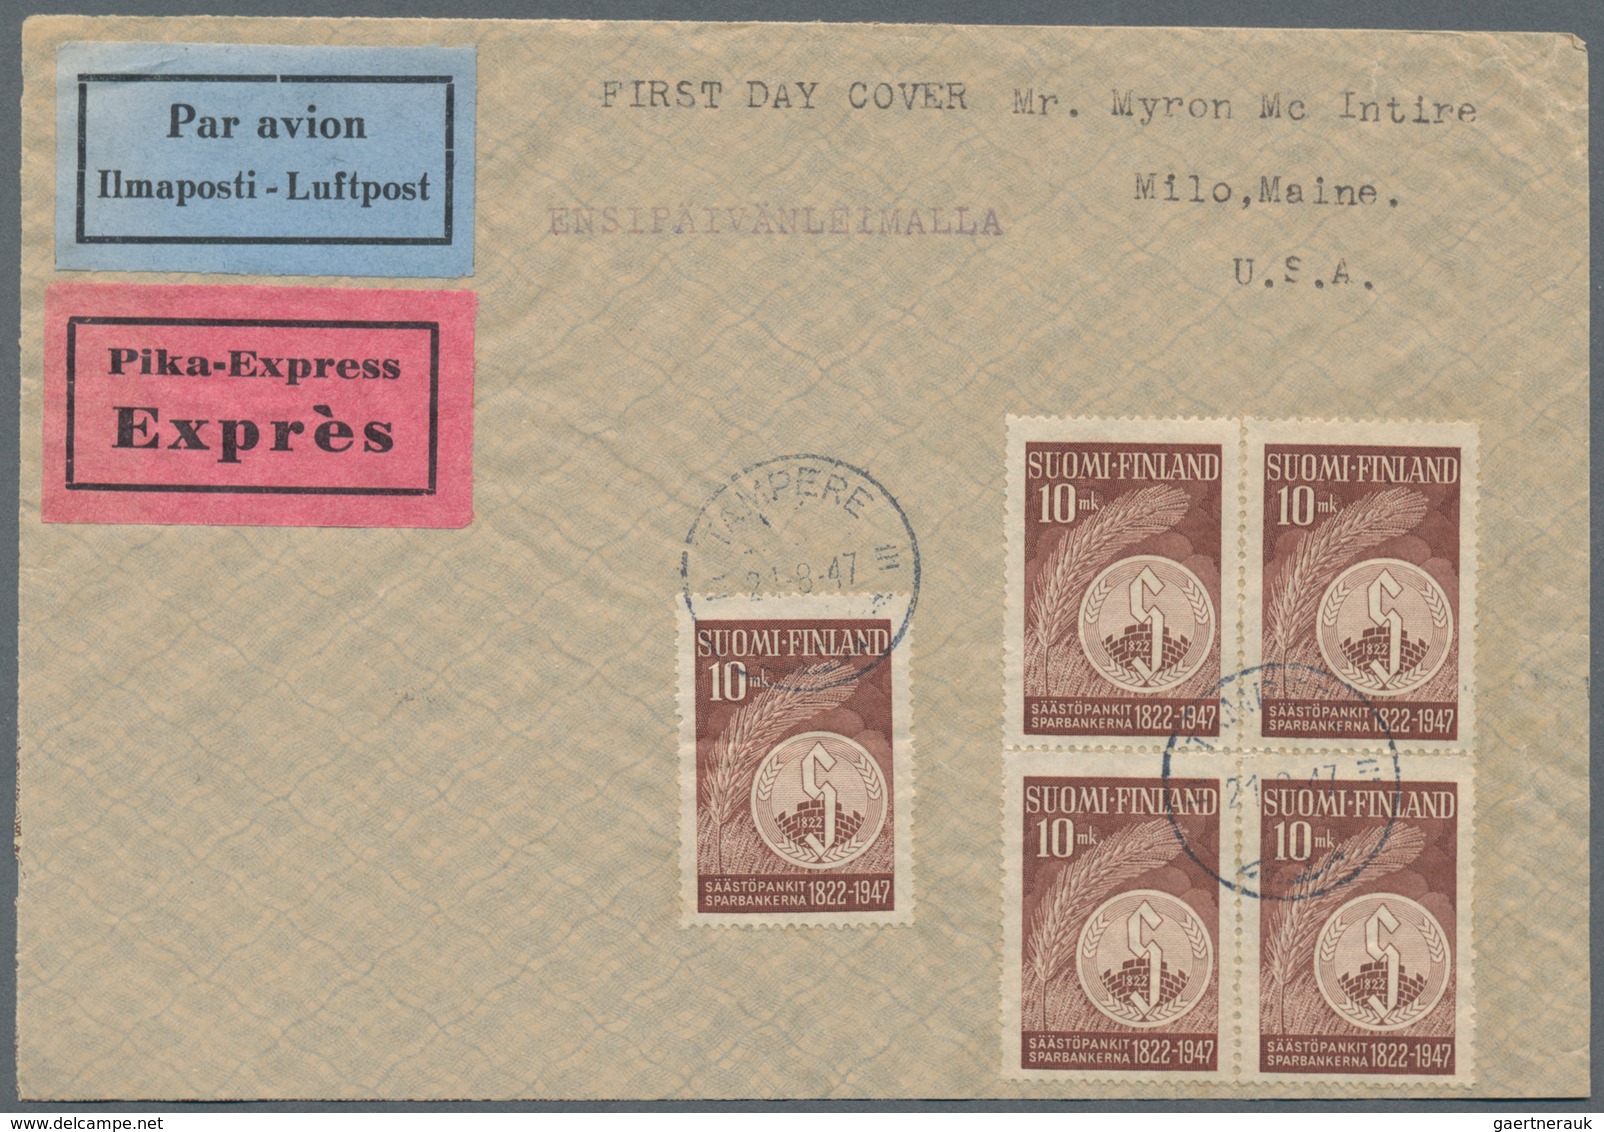 Finnland: 1870/1990, holding of ca. 150 letters, cards and postal stationery, incl. registered mail,